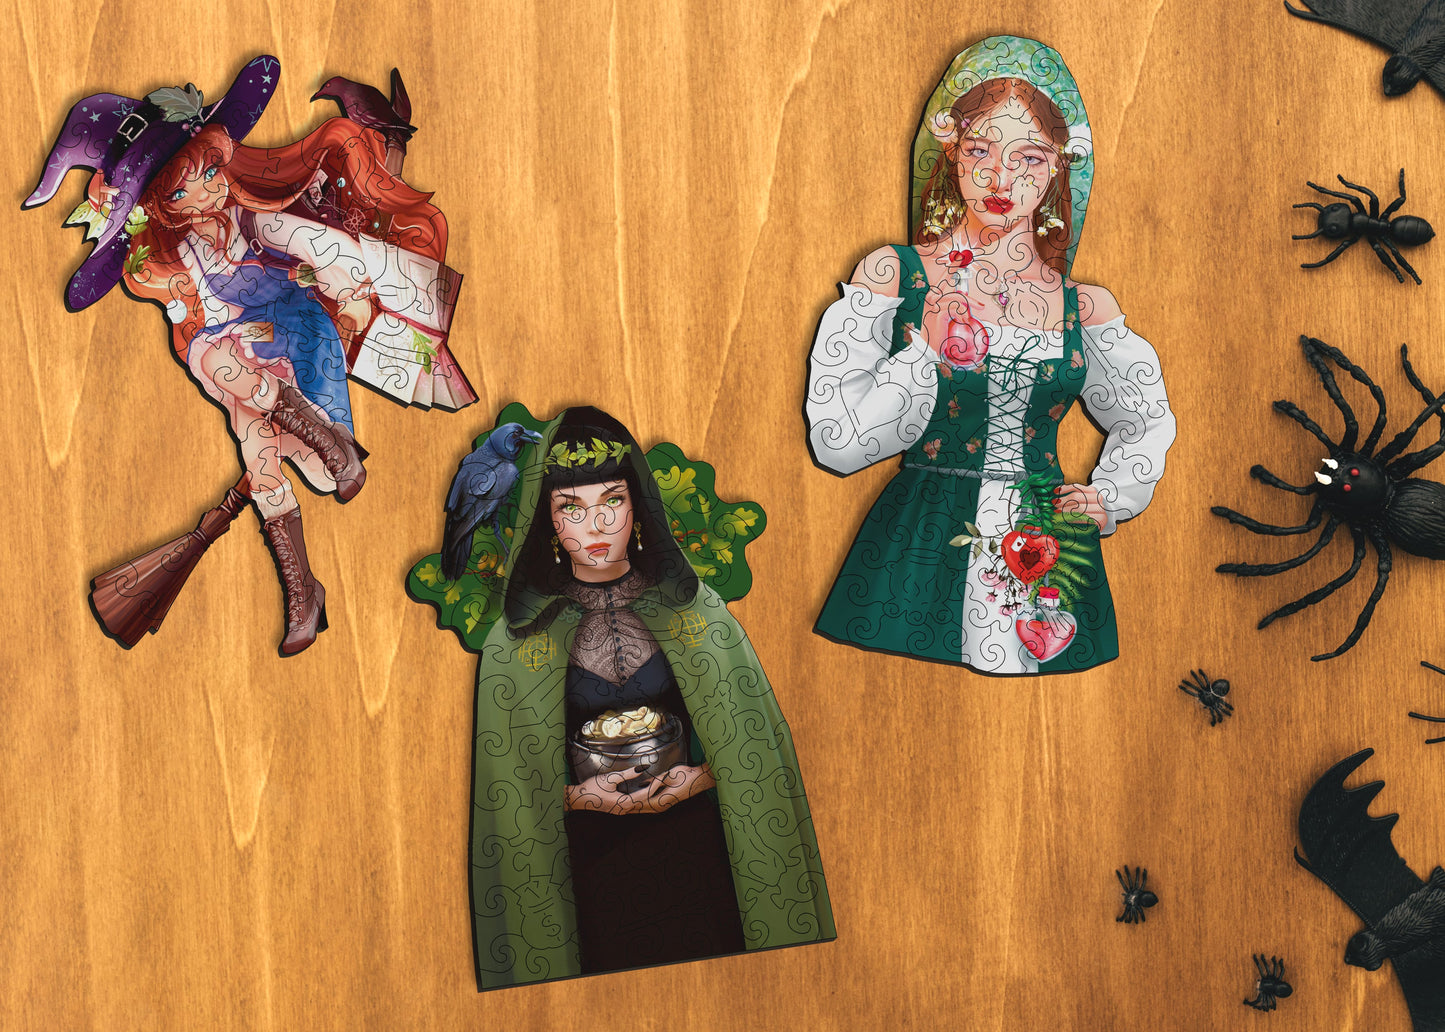 Witches Pack, Wealth Witch, Love Witch and Aurelia Witch Wooden Special premium Pack of 3 puzzles Active Puzzles